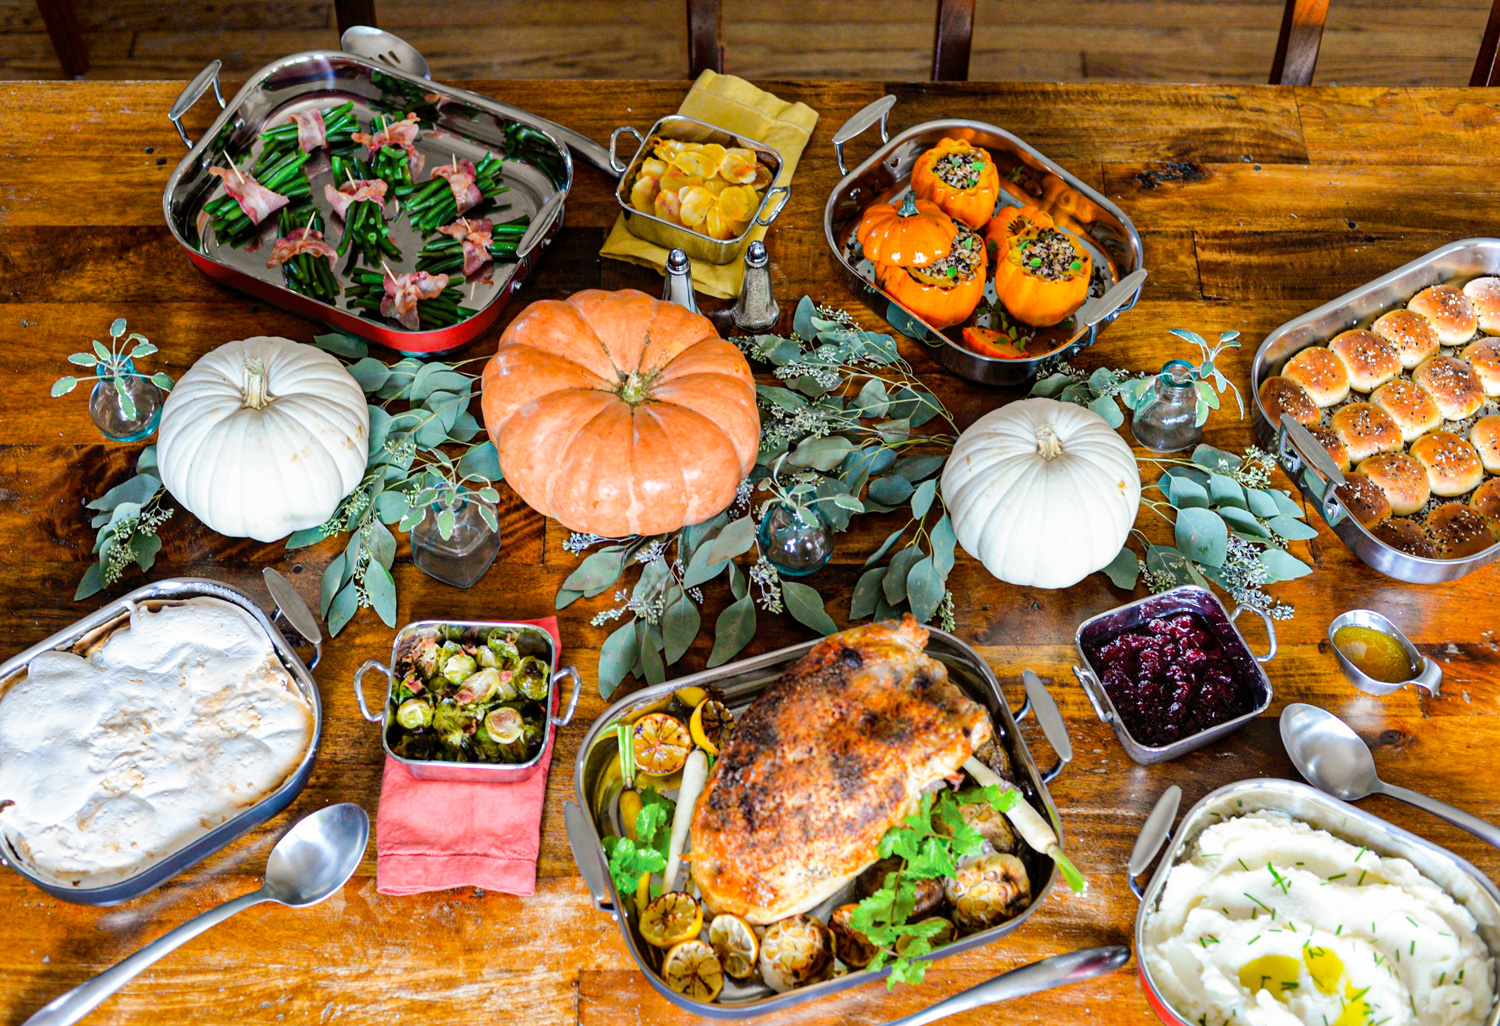 Inspiration for Holiday Feasting